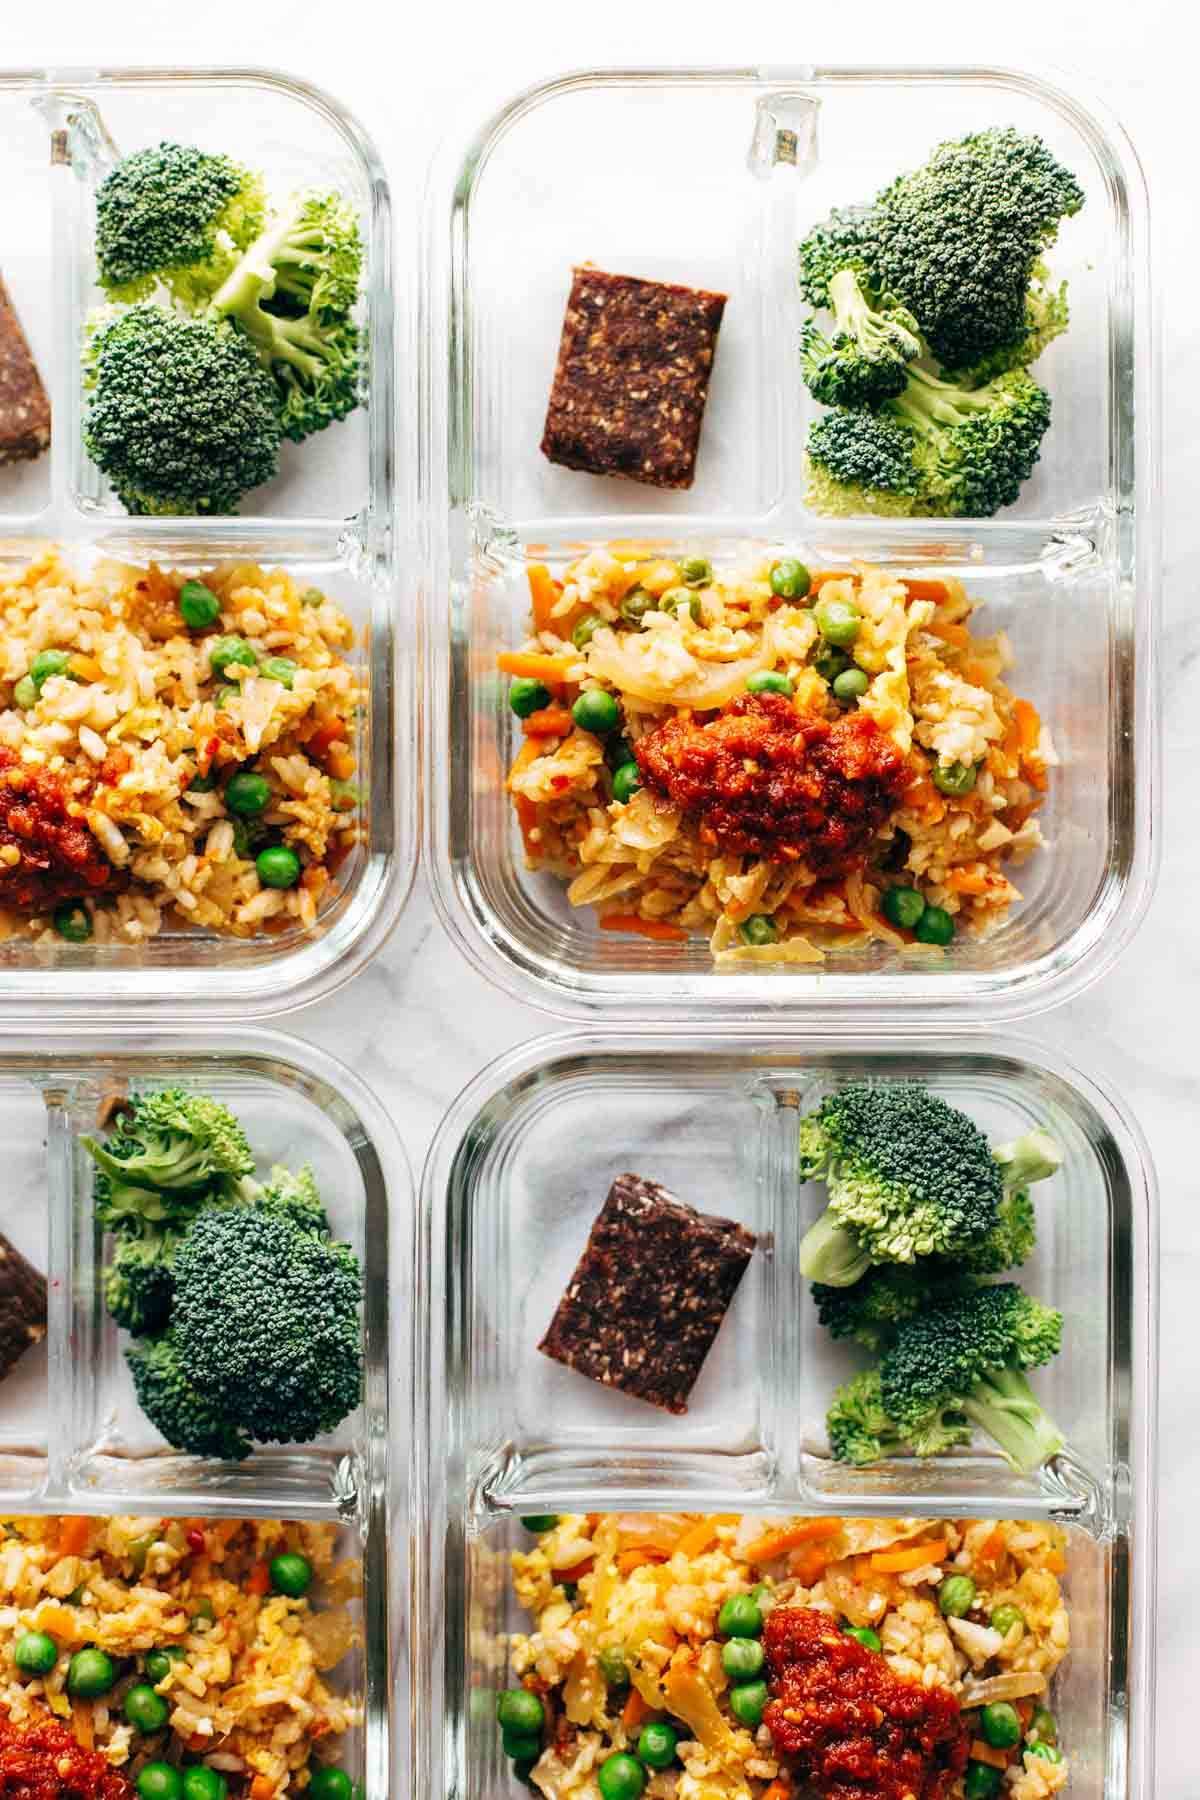 Kimchi fried rice in meal prep containers.